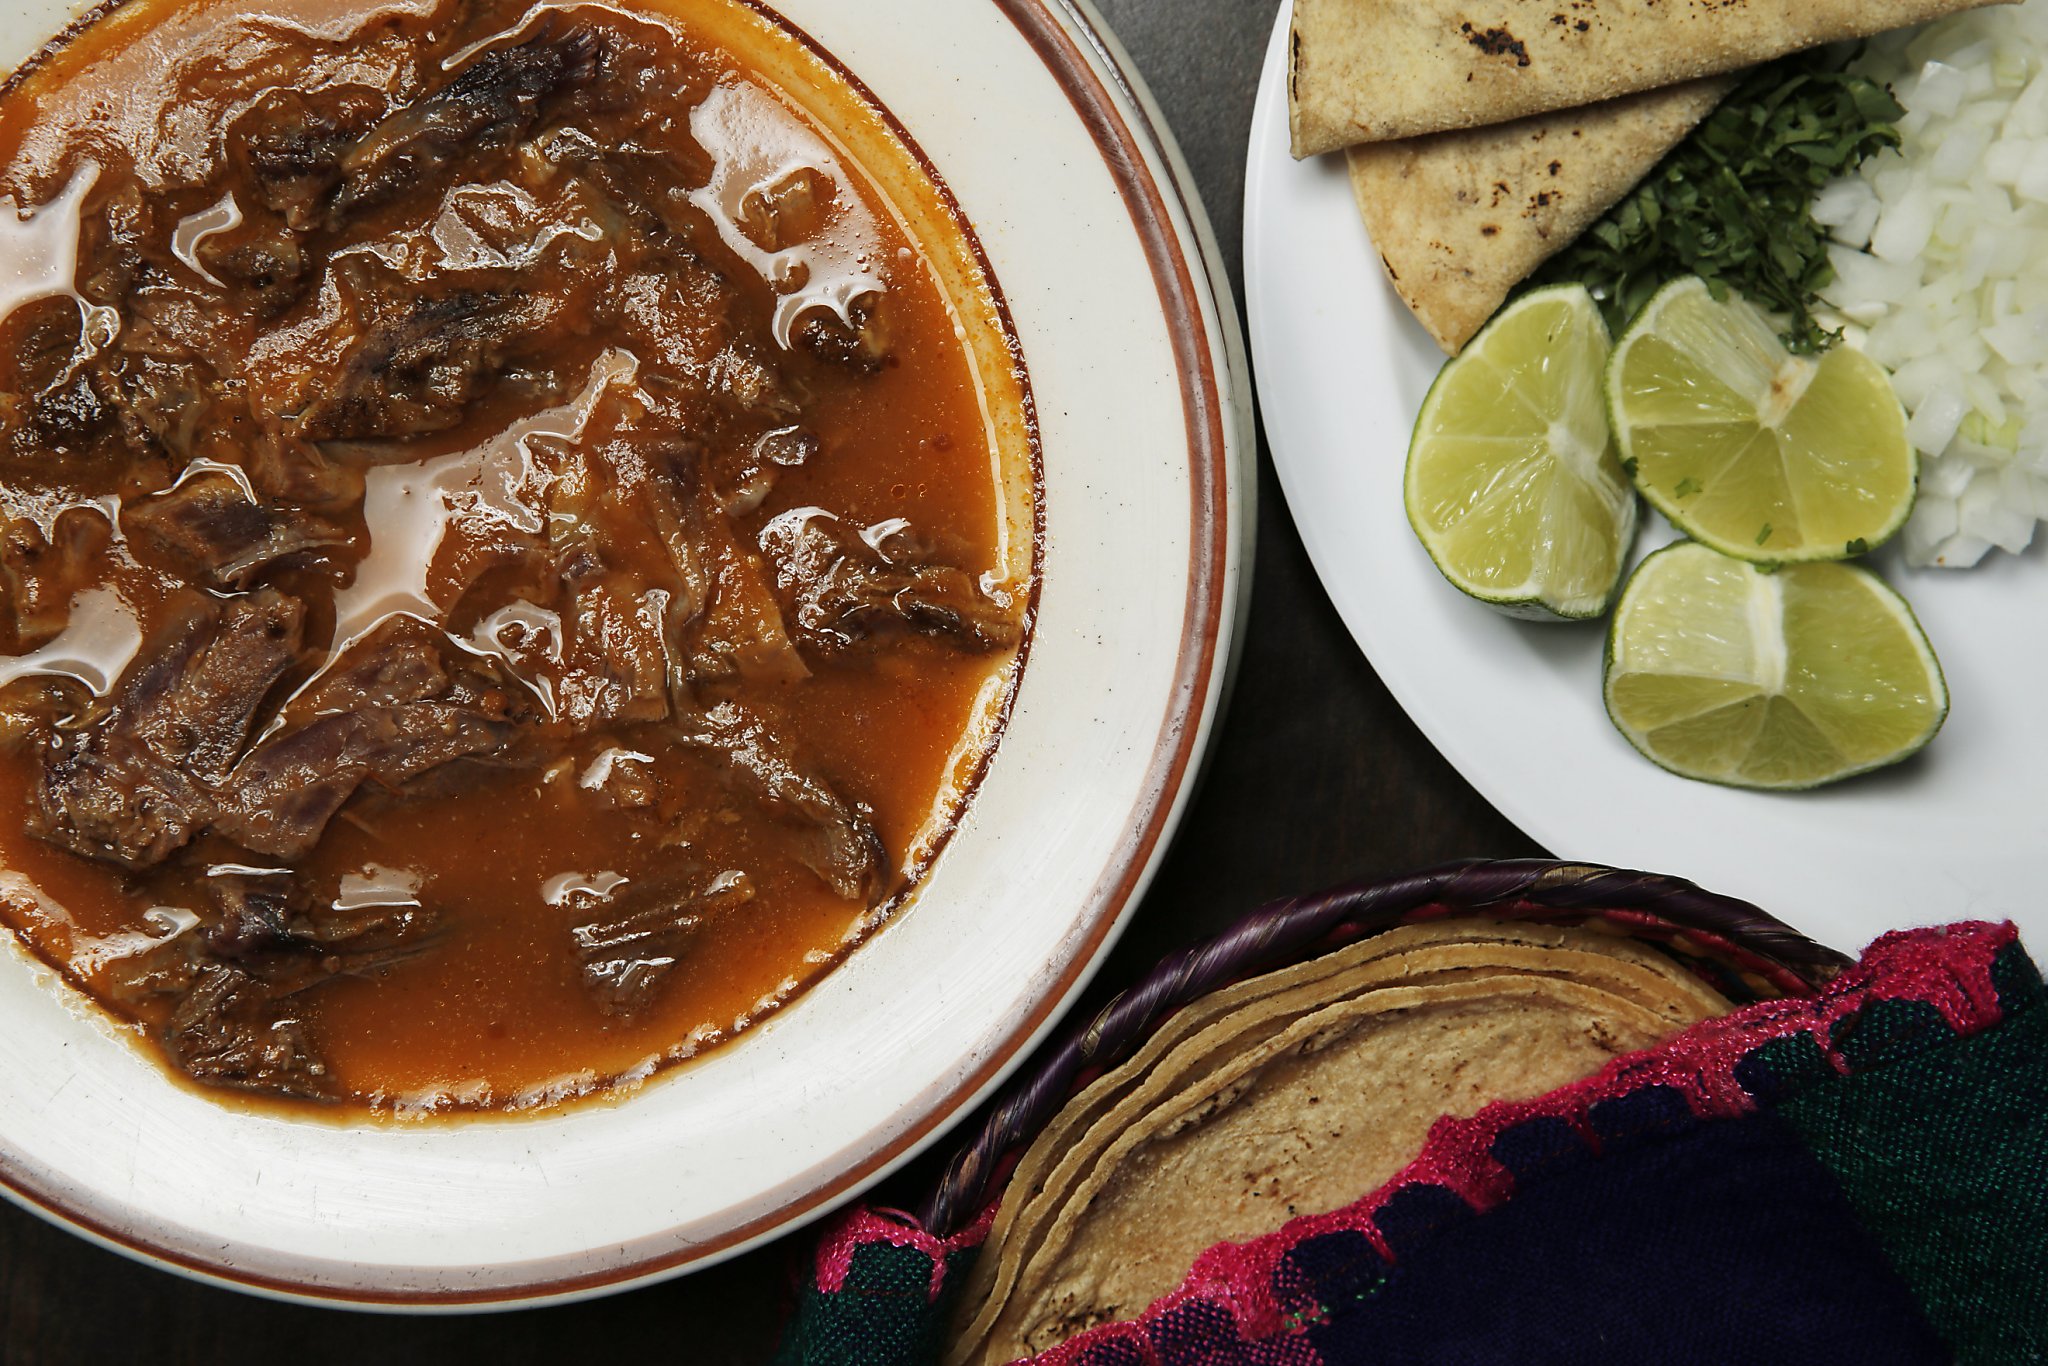 Oakland is home to the many charms of birria